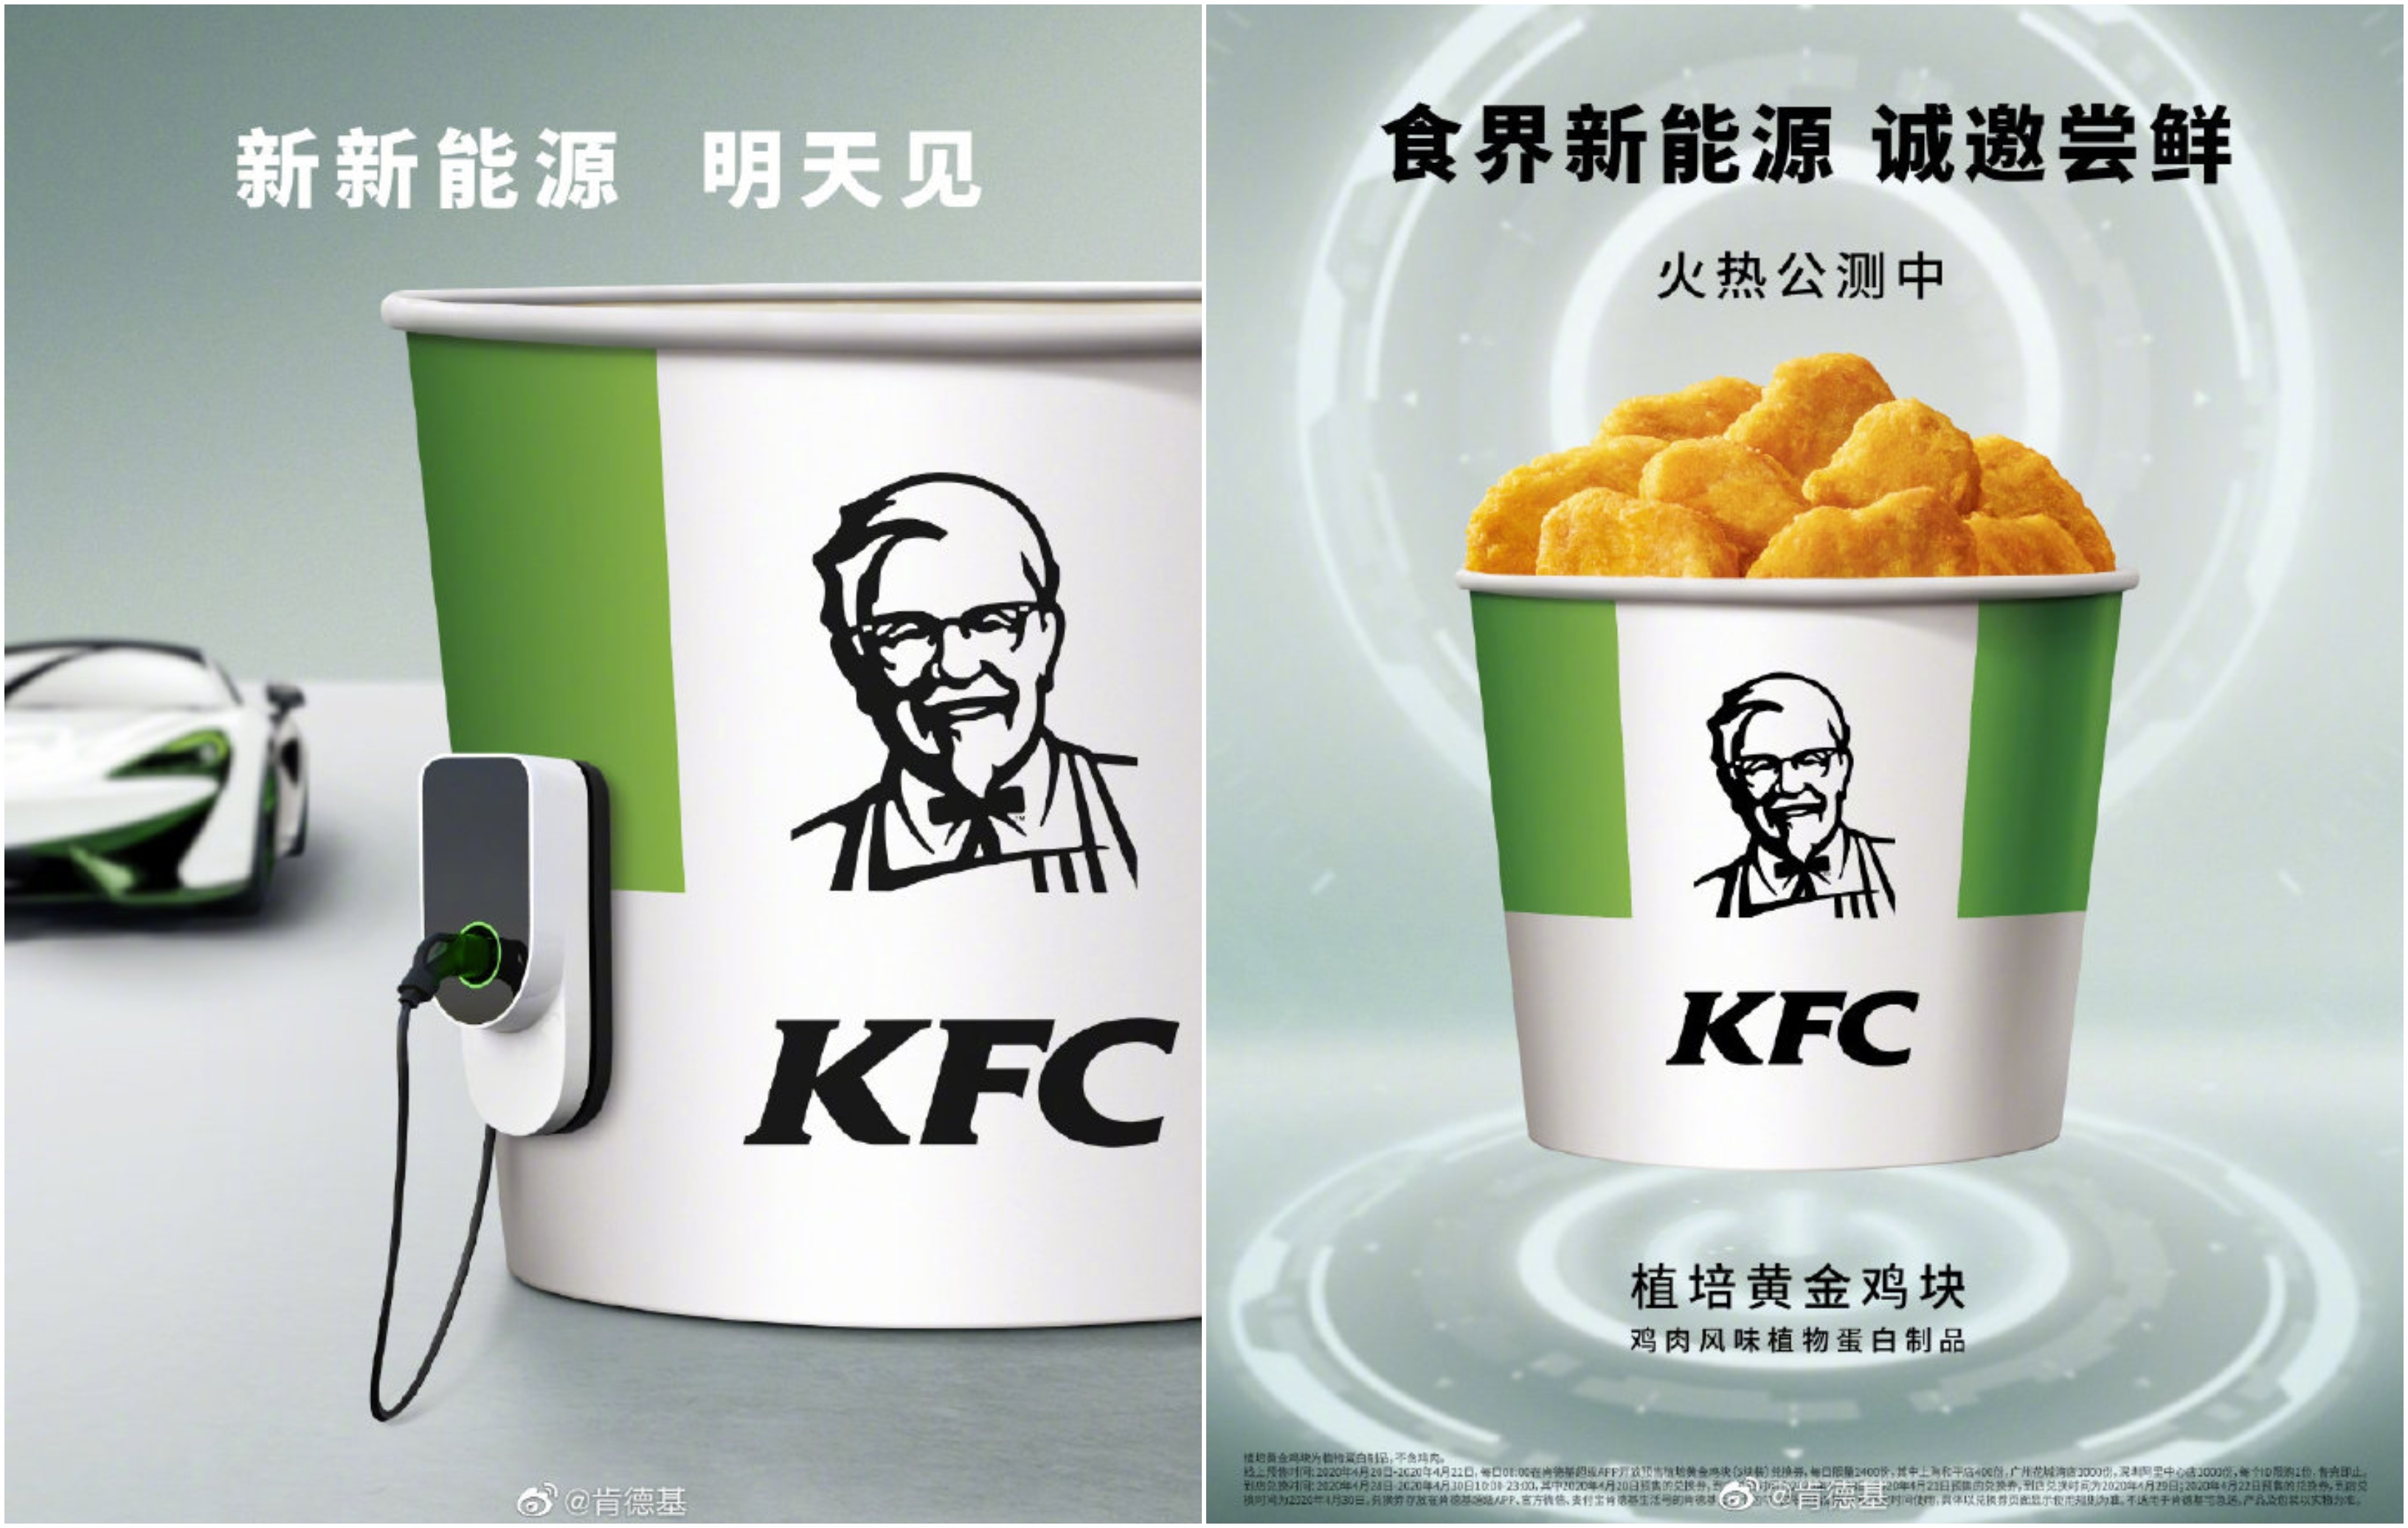 Despite what its marketing campaign would have us believe, KFC is not selling electric cars. (Picture: KFC via Weibo)